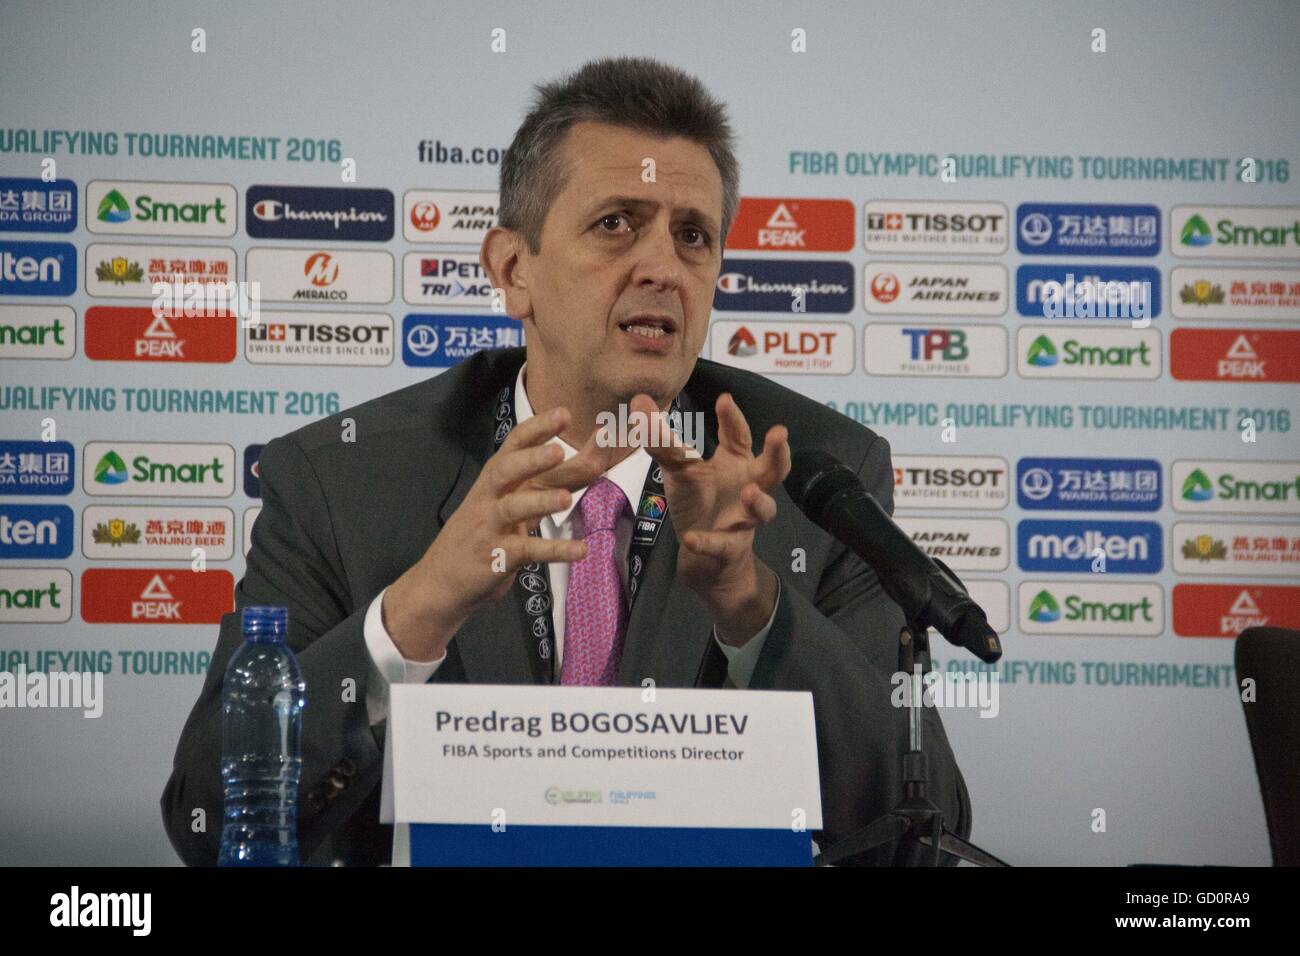 Philippines. 10th July, 2016. Predrag Bogosavljev gestures as he talks to the media about FIBA competition changes. Predrag Bogosavljev (FIBA Sport & Competitions Director) and Patrick Koller (FIBA Communications Director) conducted a press conference on Sunday before the final qualifying game at the mall of Asia Arena in Pasay City, Metro Manila. The FIBA officials discussed the changes to the upcoming tournaments in the next few years. © J Gerard Seguia/ZUMA Wire/Alamy Live News Stock Photo